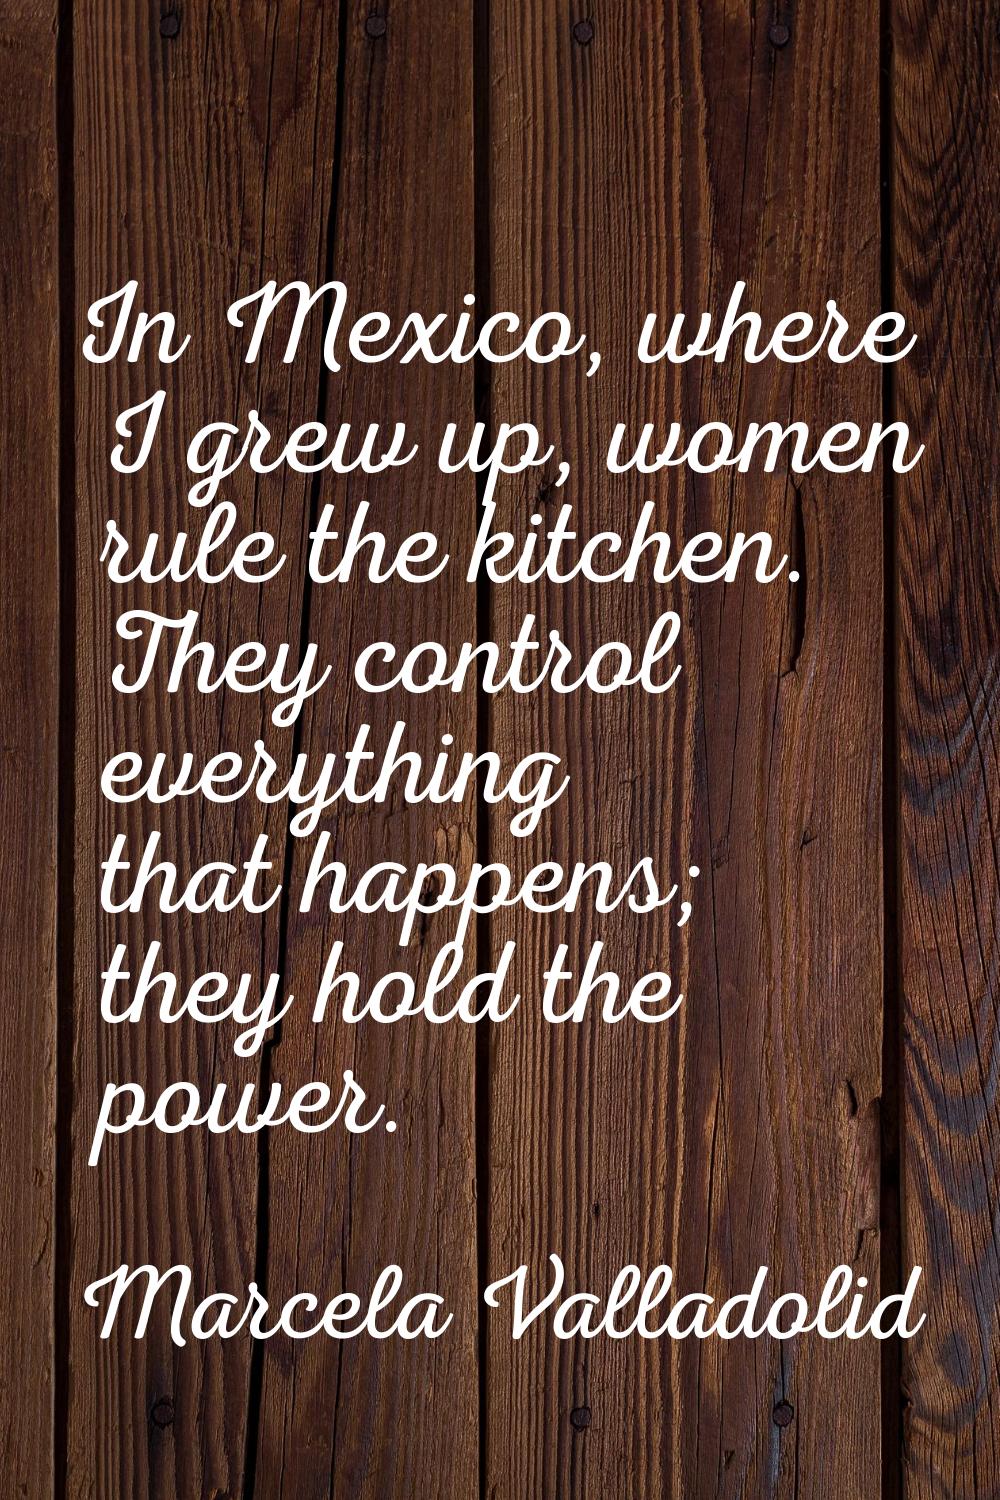 In Mexico, where I grew up, women rule the kitchen. They control everything that happens; they hold